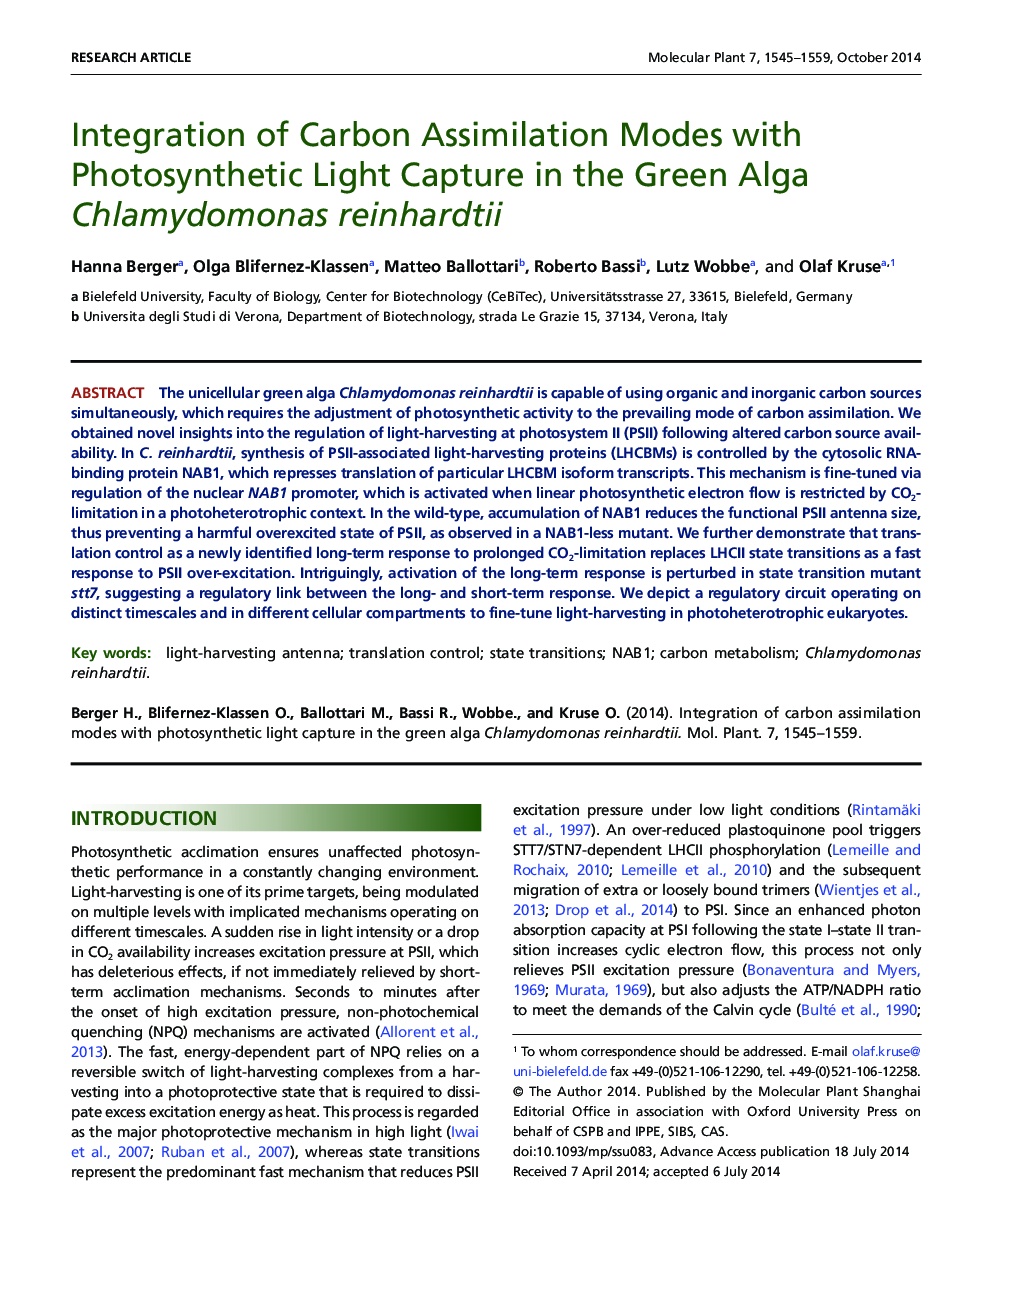 Integration of Carbon Assimilation Modes with Photosynthetic Light Capture in the Green Alga Chlamydomonas reinhardtii 